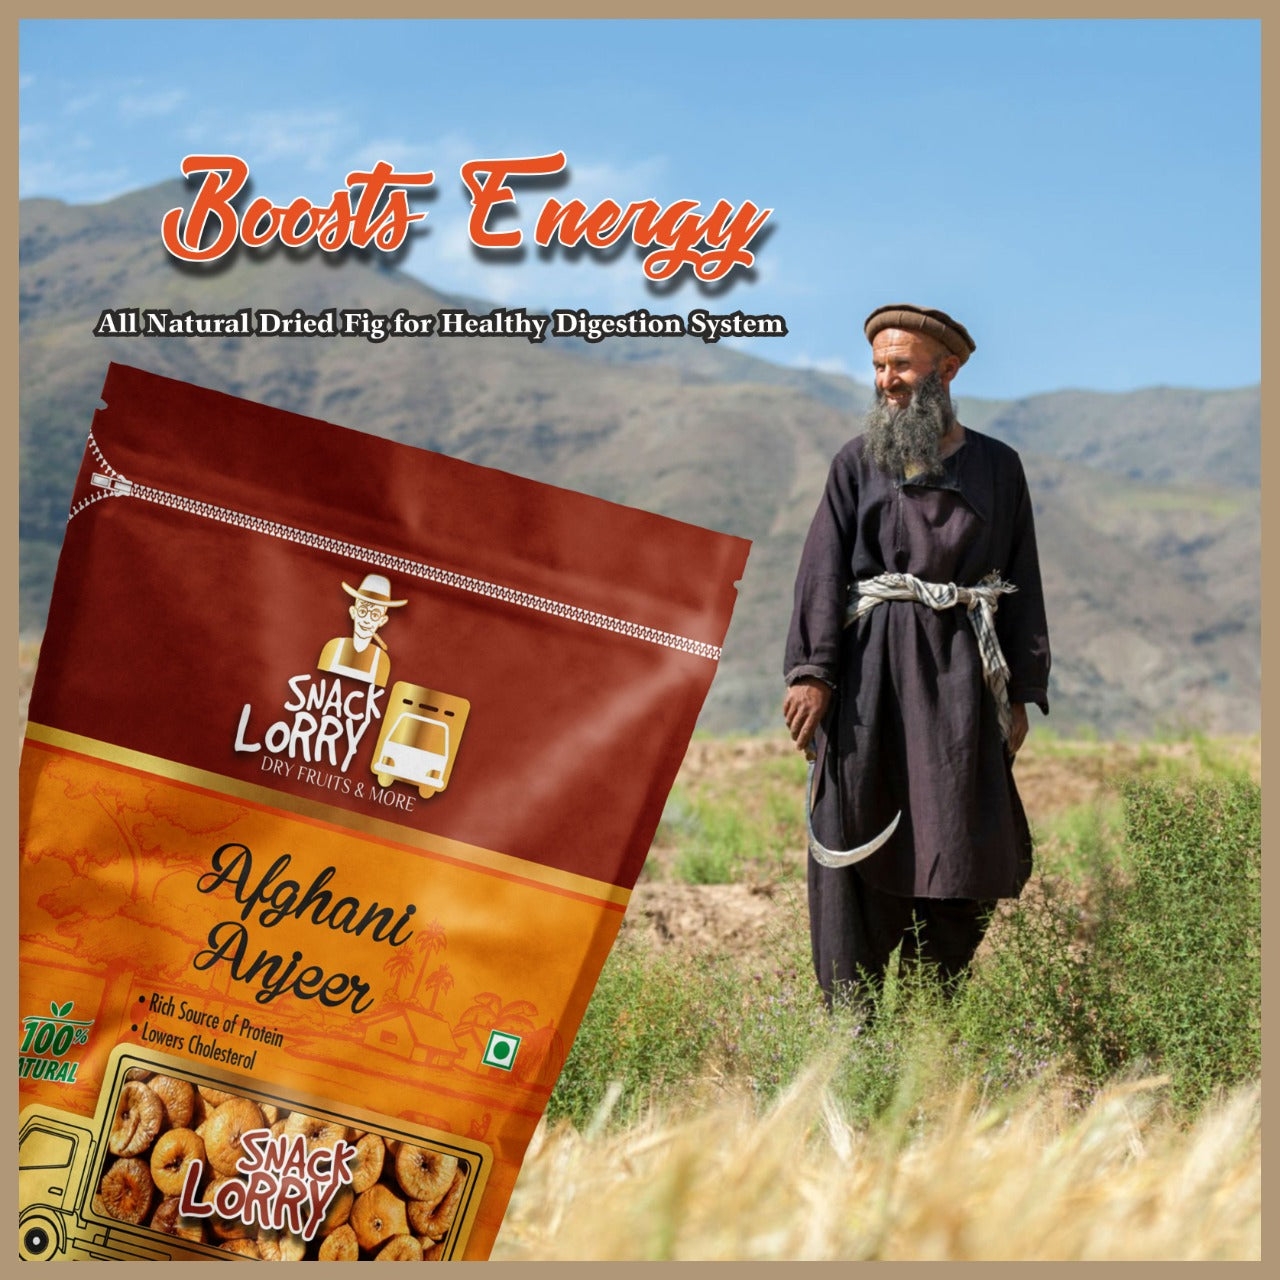 Snacklorry Afghani Anjeer | 200g